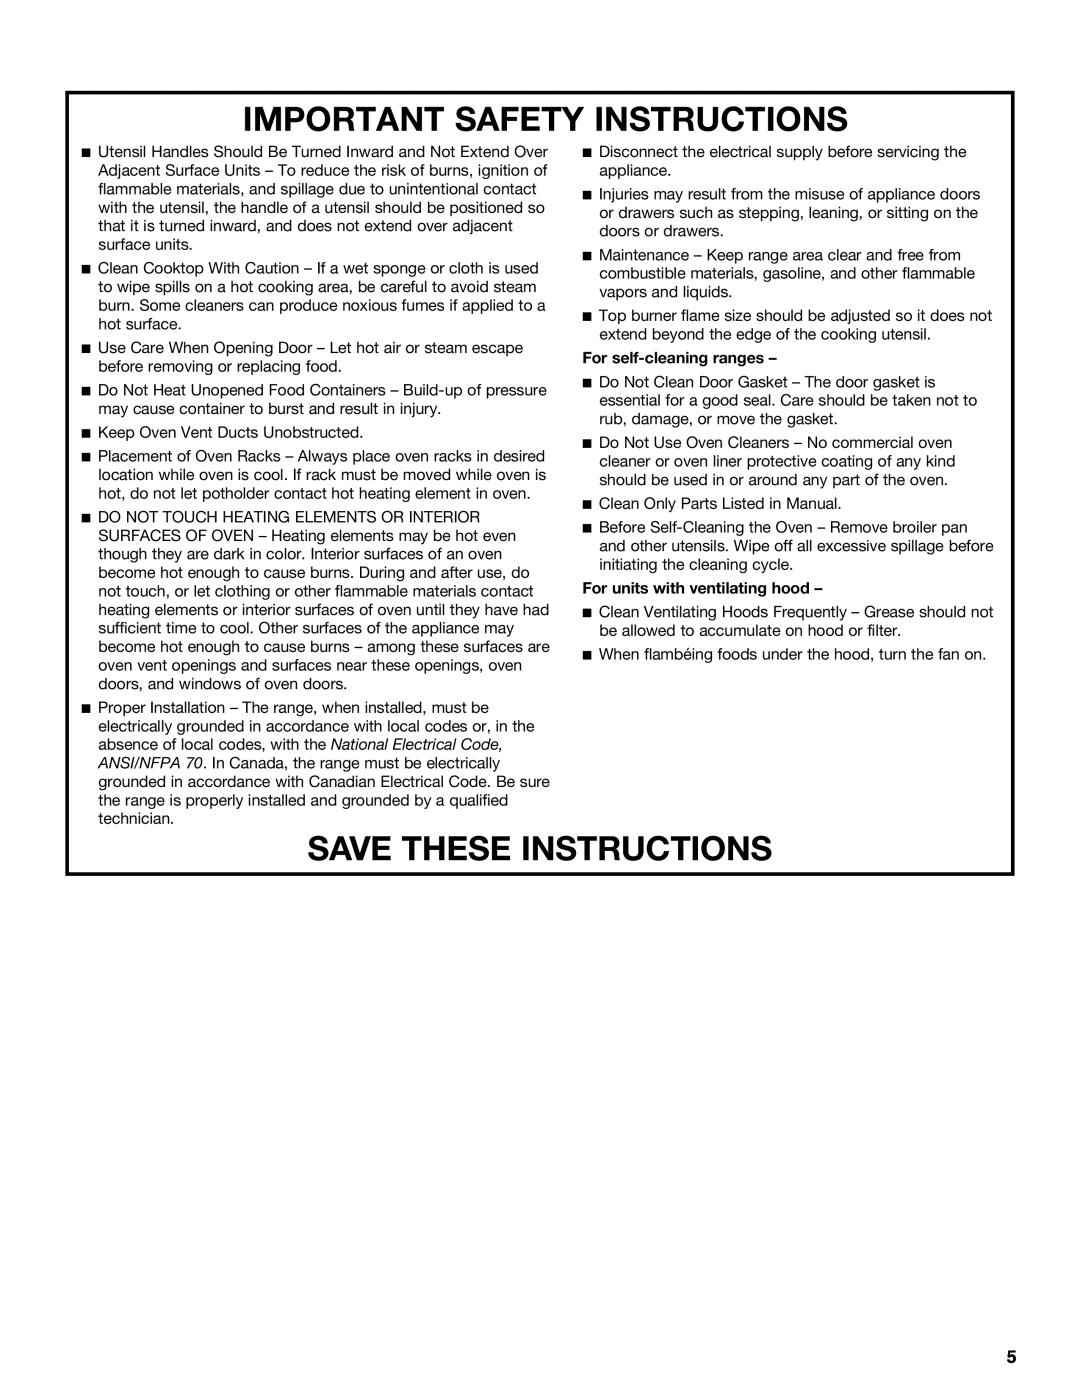 Jenn-Air JGRP430, JGRP548, JGRP536, JGRP436 Important Safety Instructions, Save These Instructions, For self-cleaning ranges 